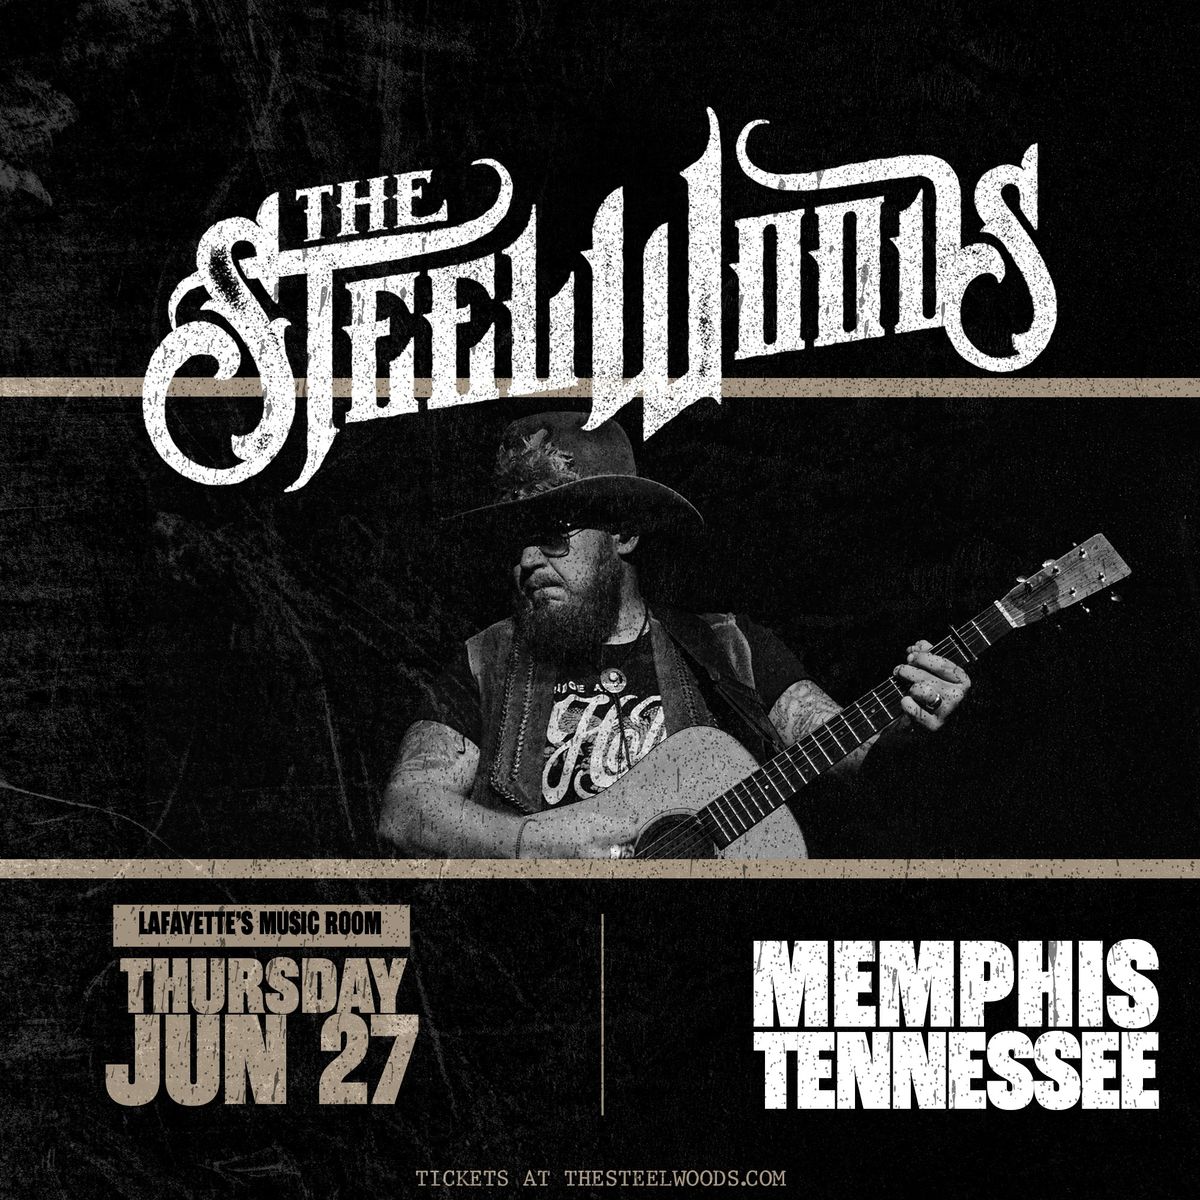 The Steel Woods with Taylor Hunnicutt